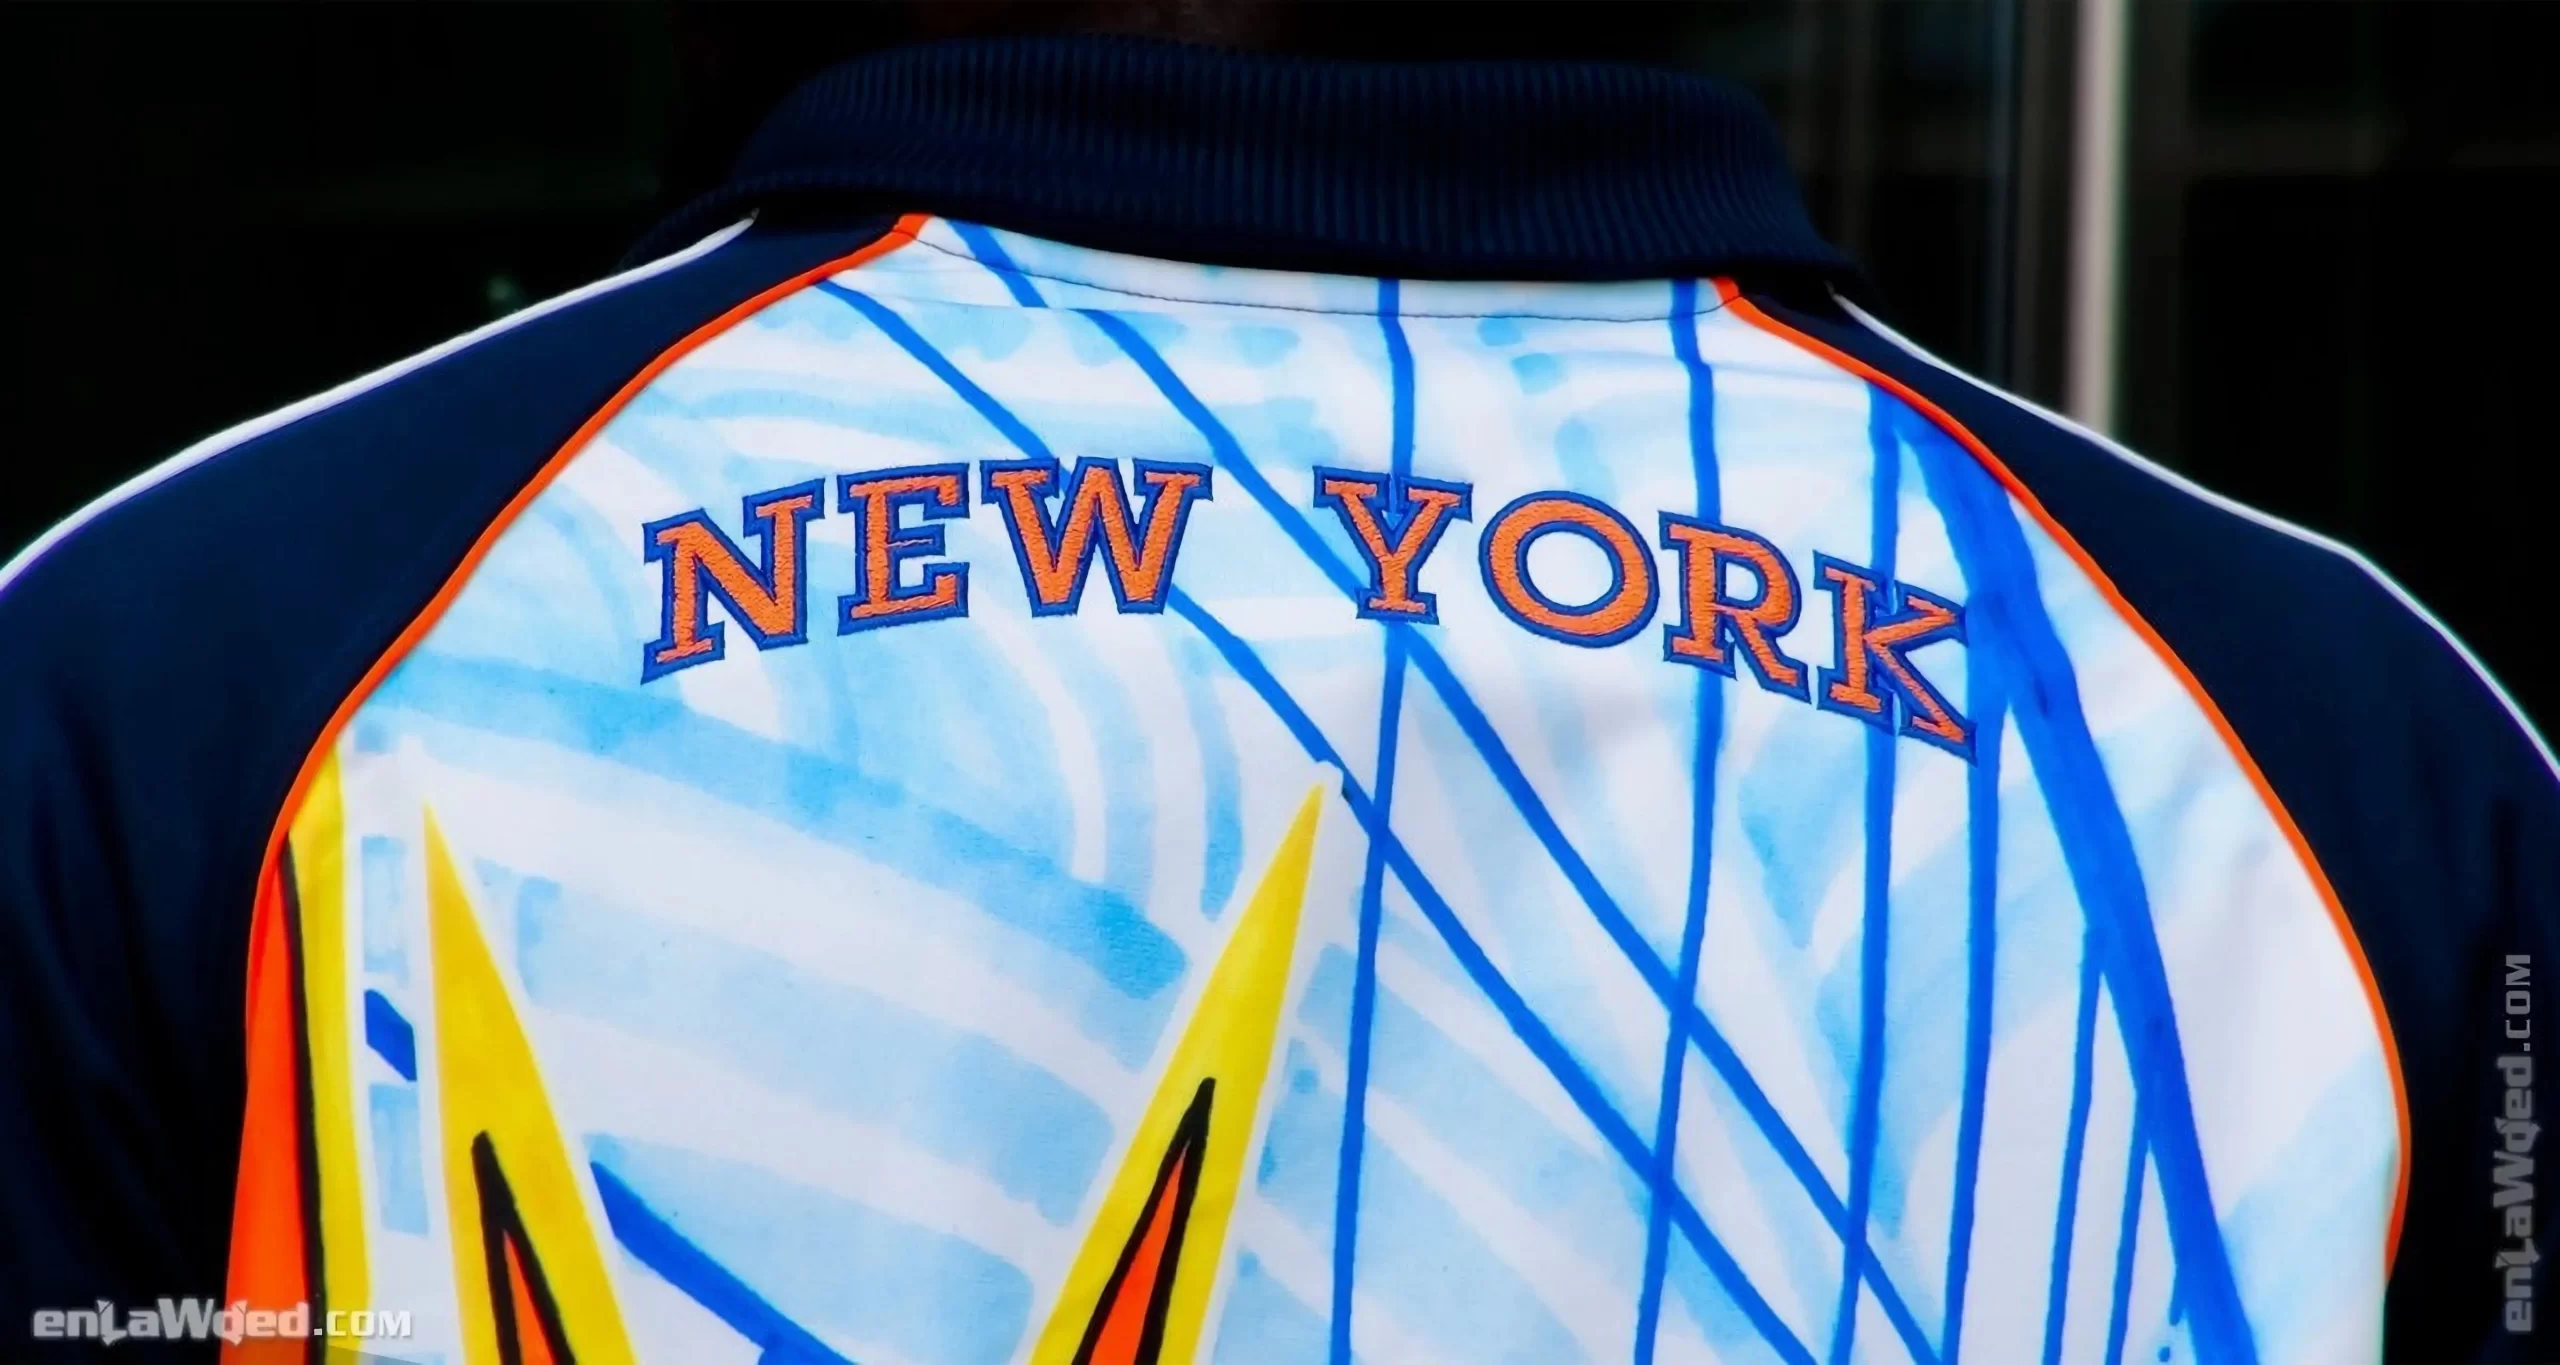 Men’s 2006 New York City Track Top by Adidas Originals: Backed (EnLawded.com file #lmchk90414ip2y123180kg9st)